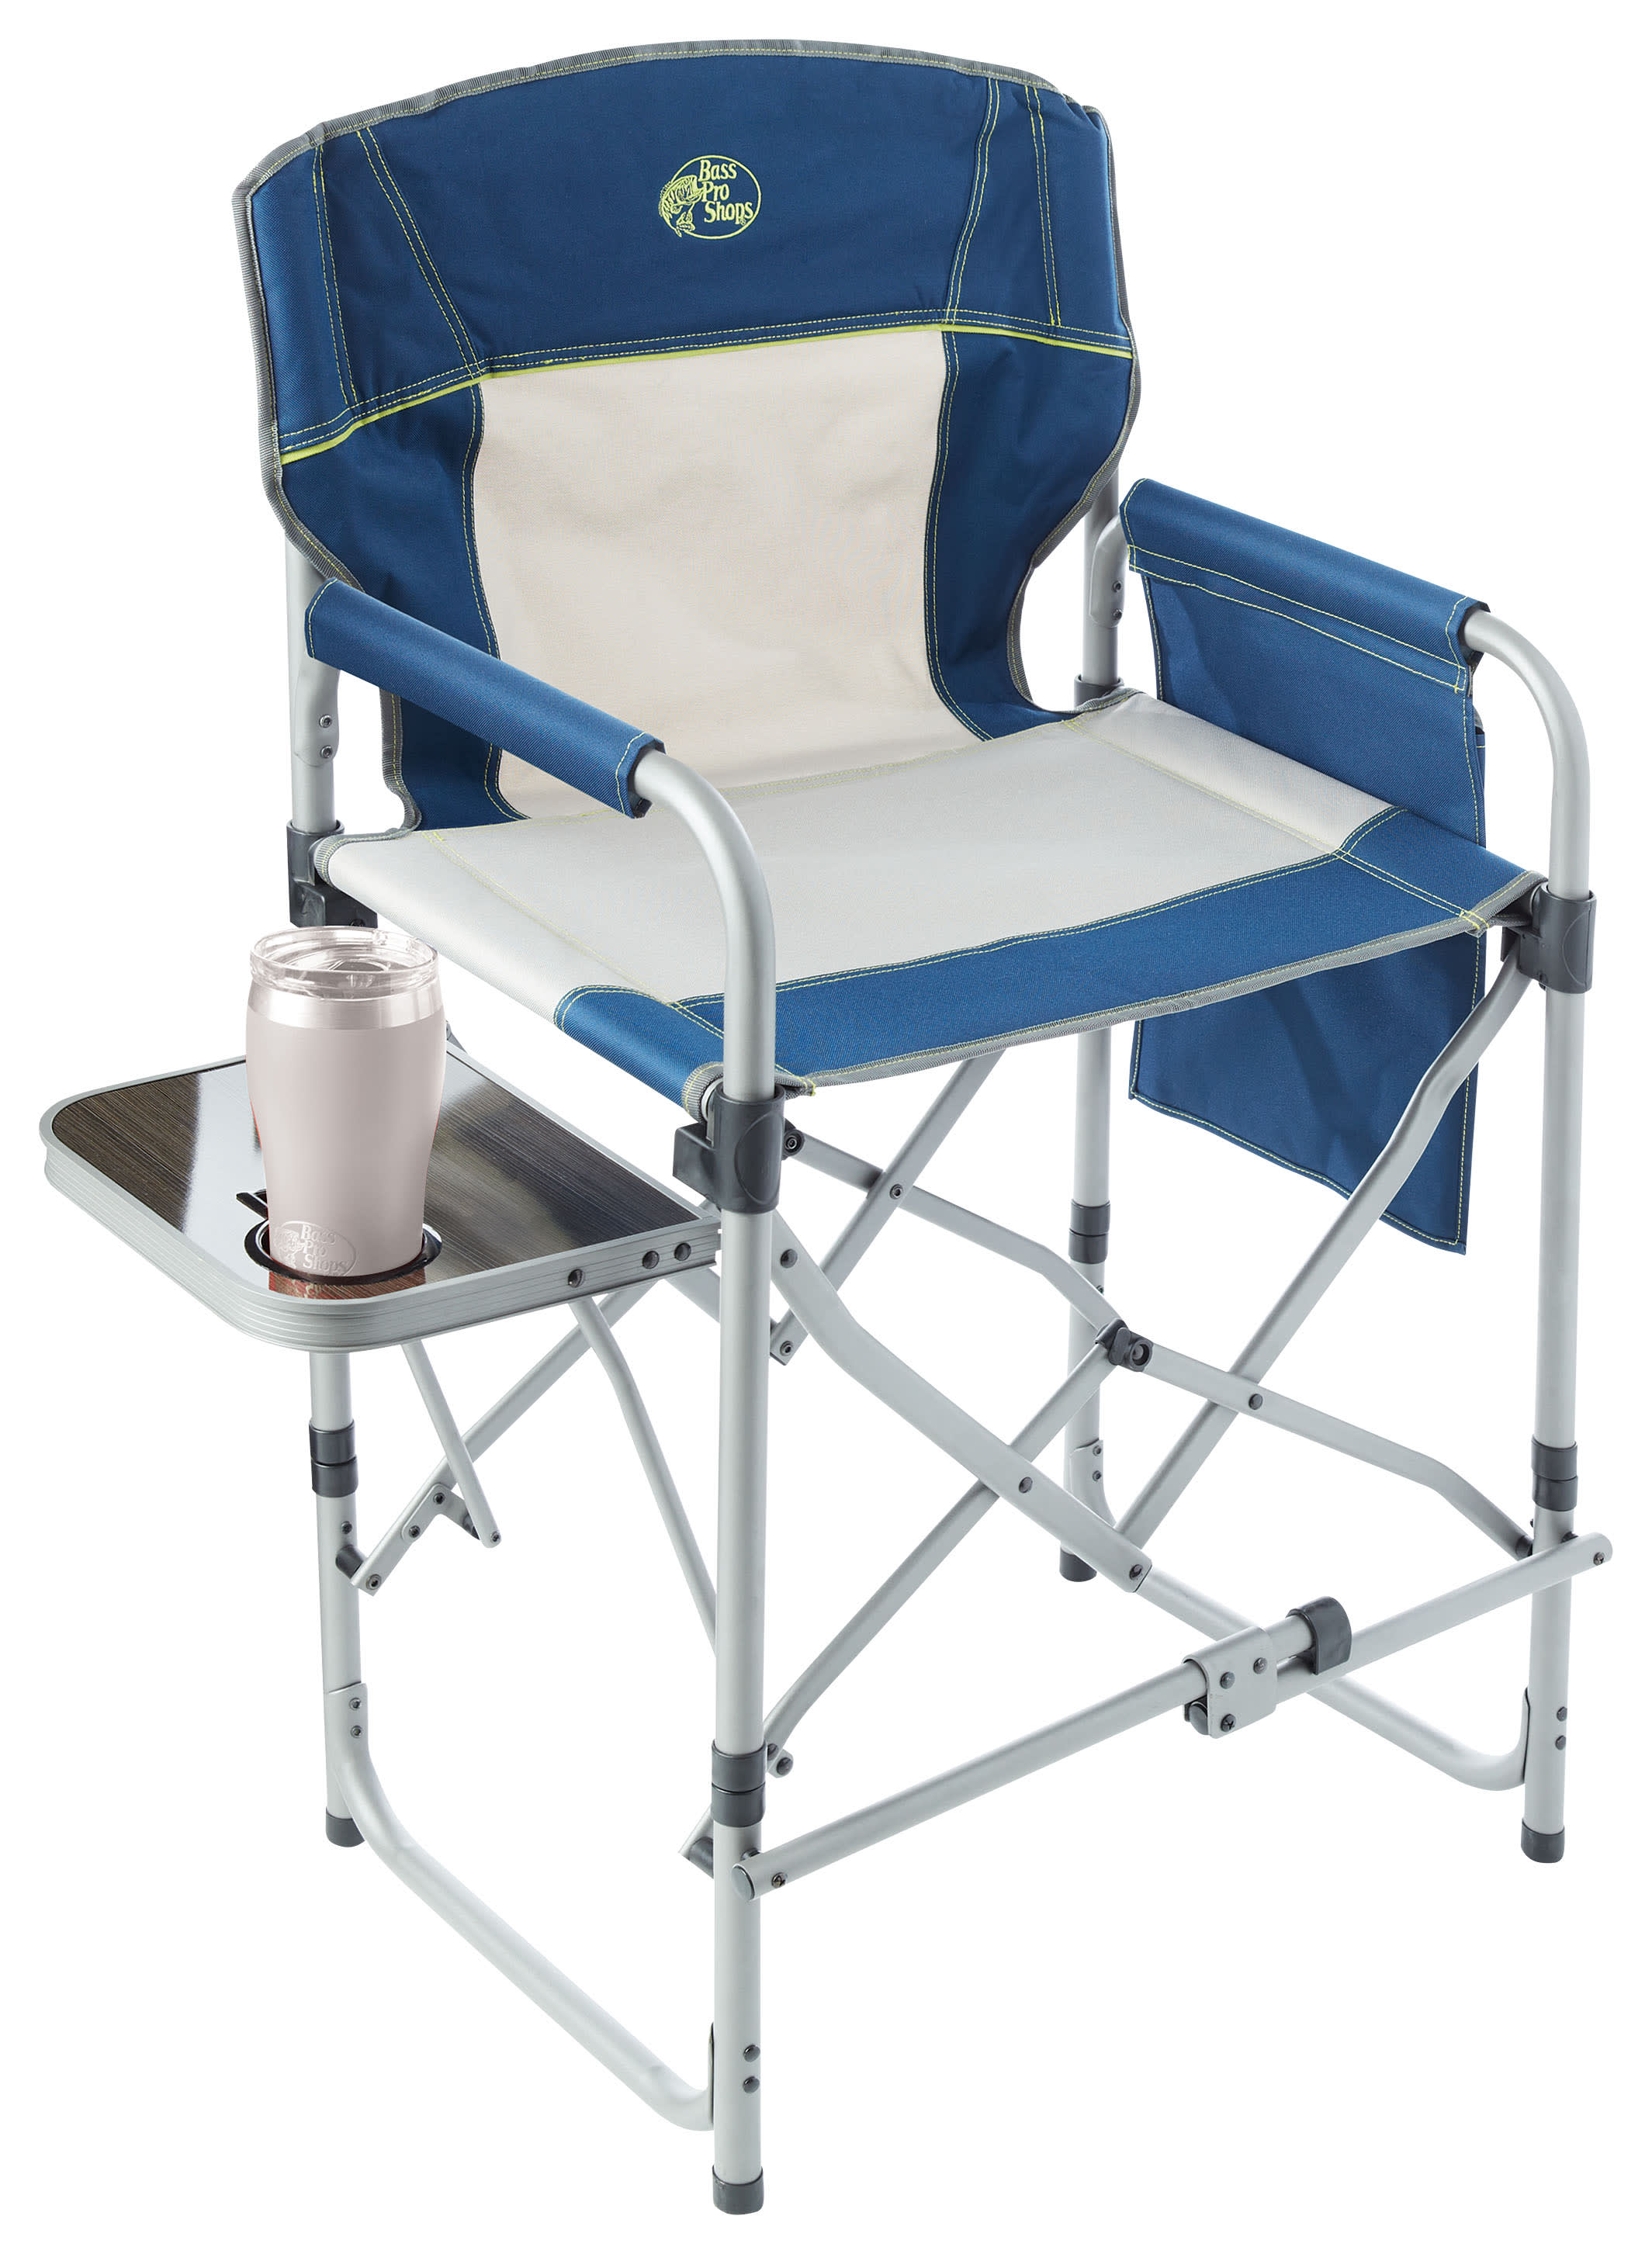 Bass Pro Shops® Magnum Director Chair with Side Table